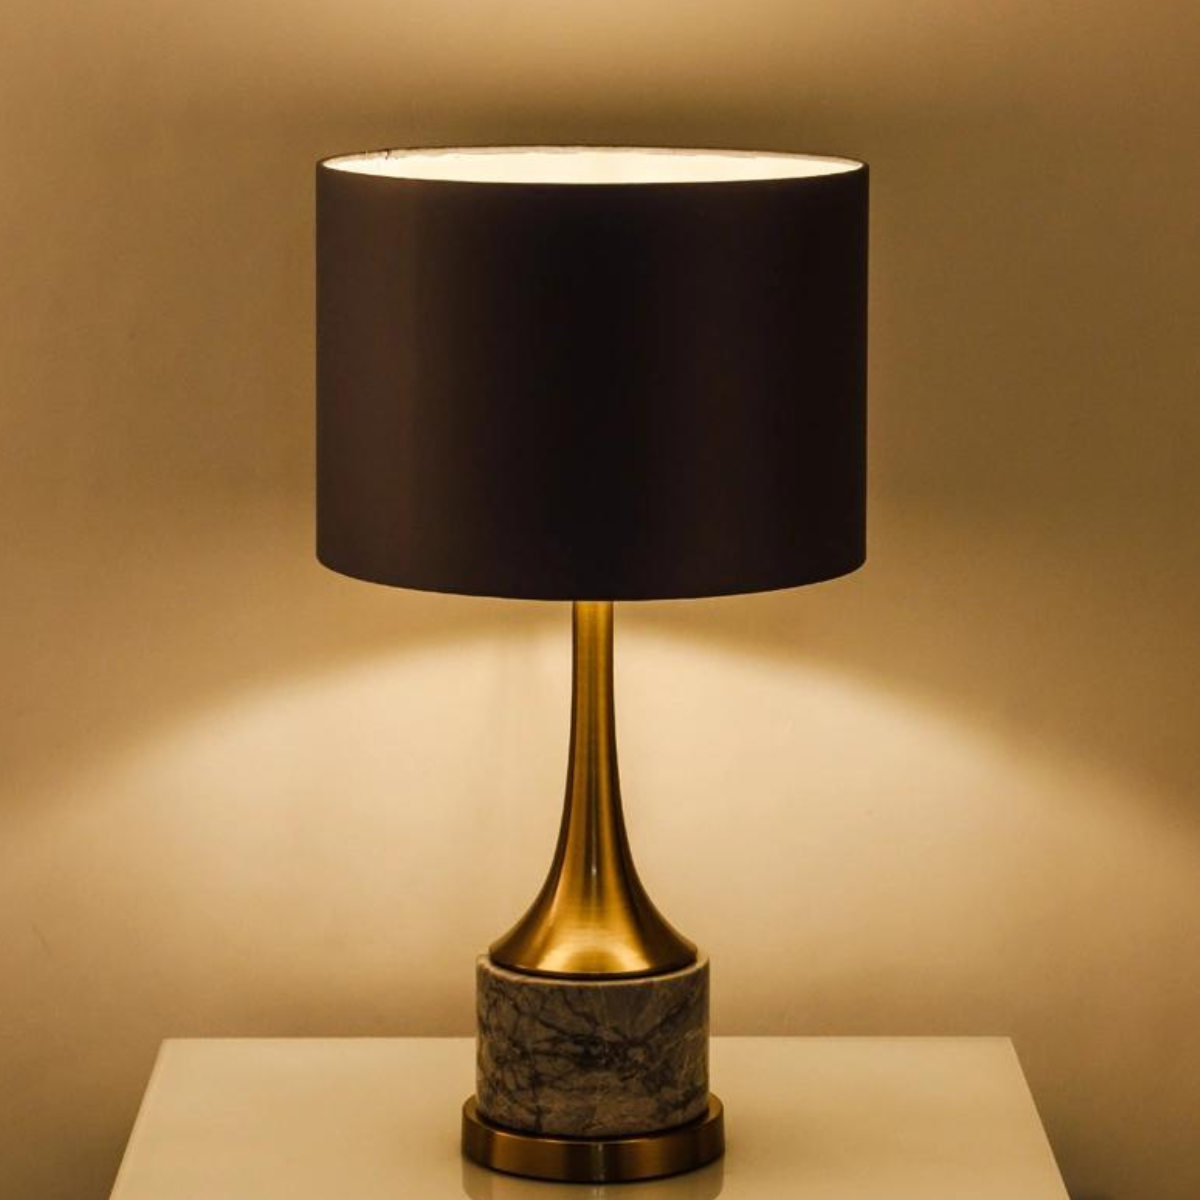 Dominion-Metal-Based-Modern-Bedside-Table-Lamp-4